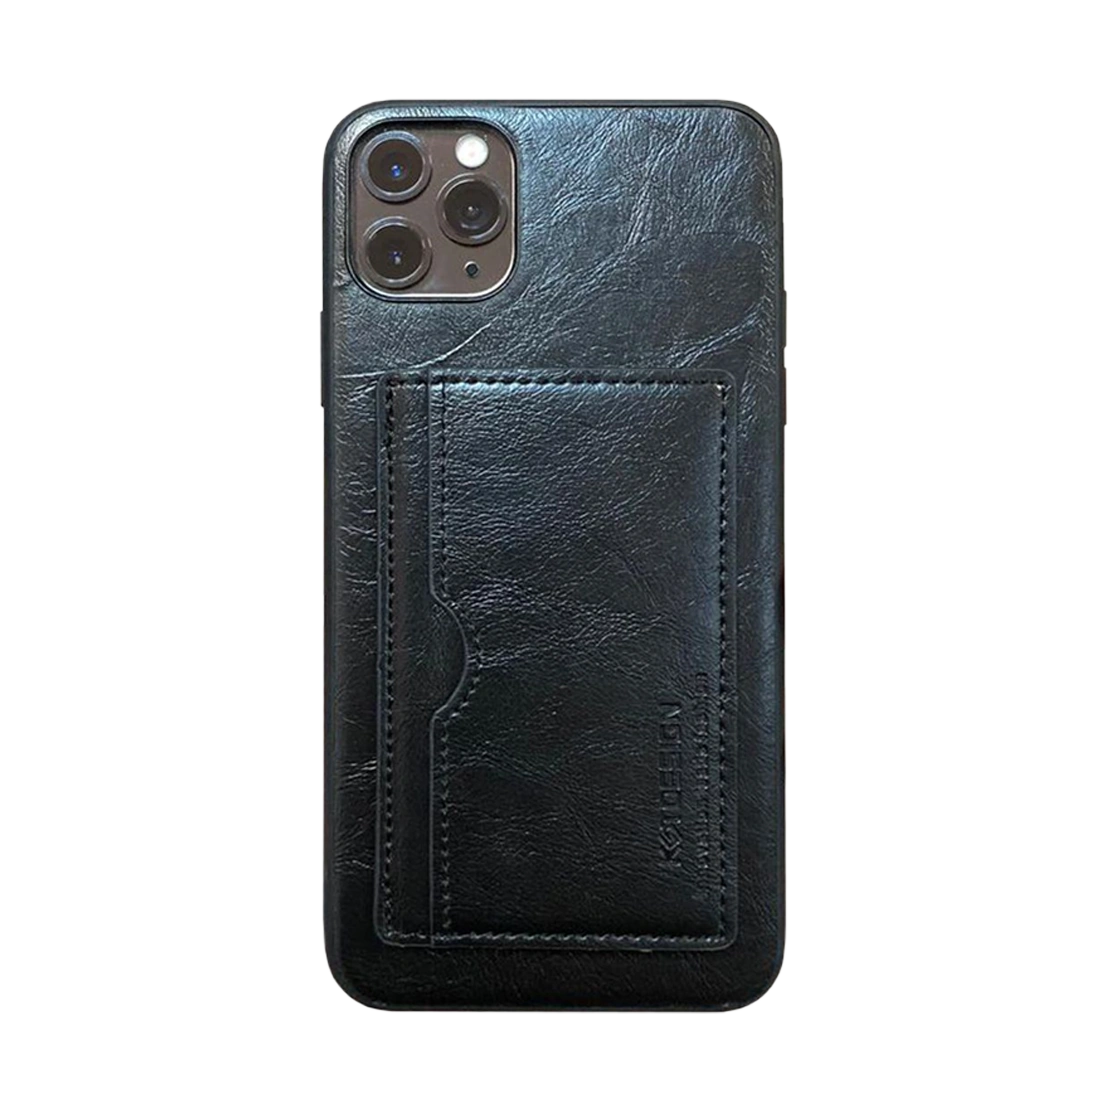 KSTDESIGN Leather Case For iPhone 11 Pro Max LE1